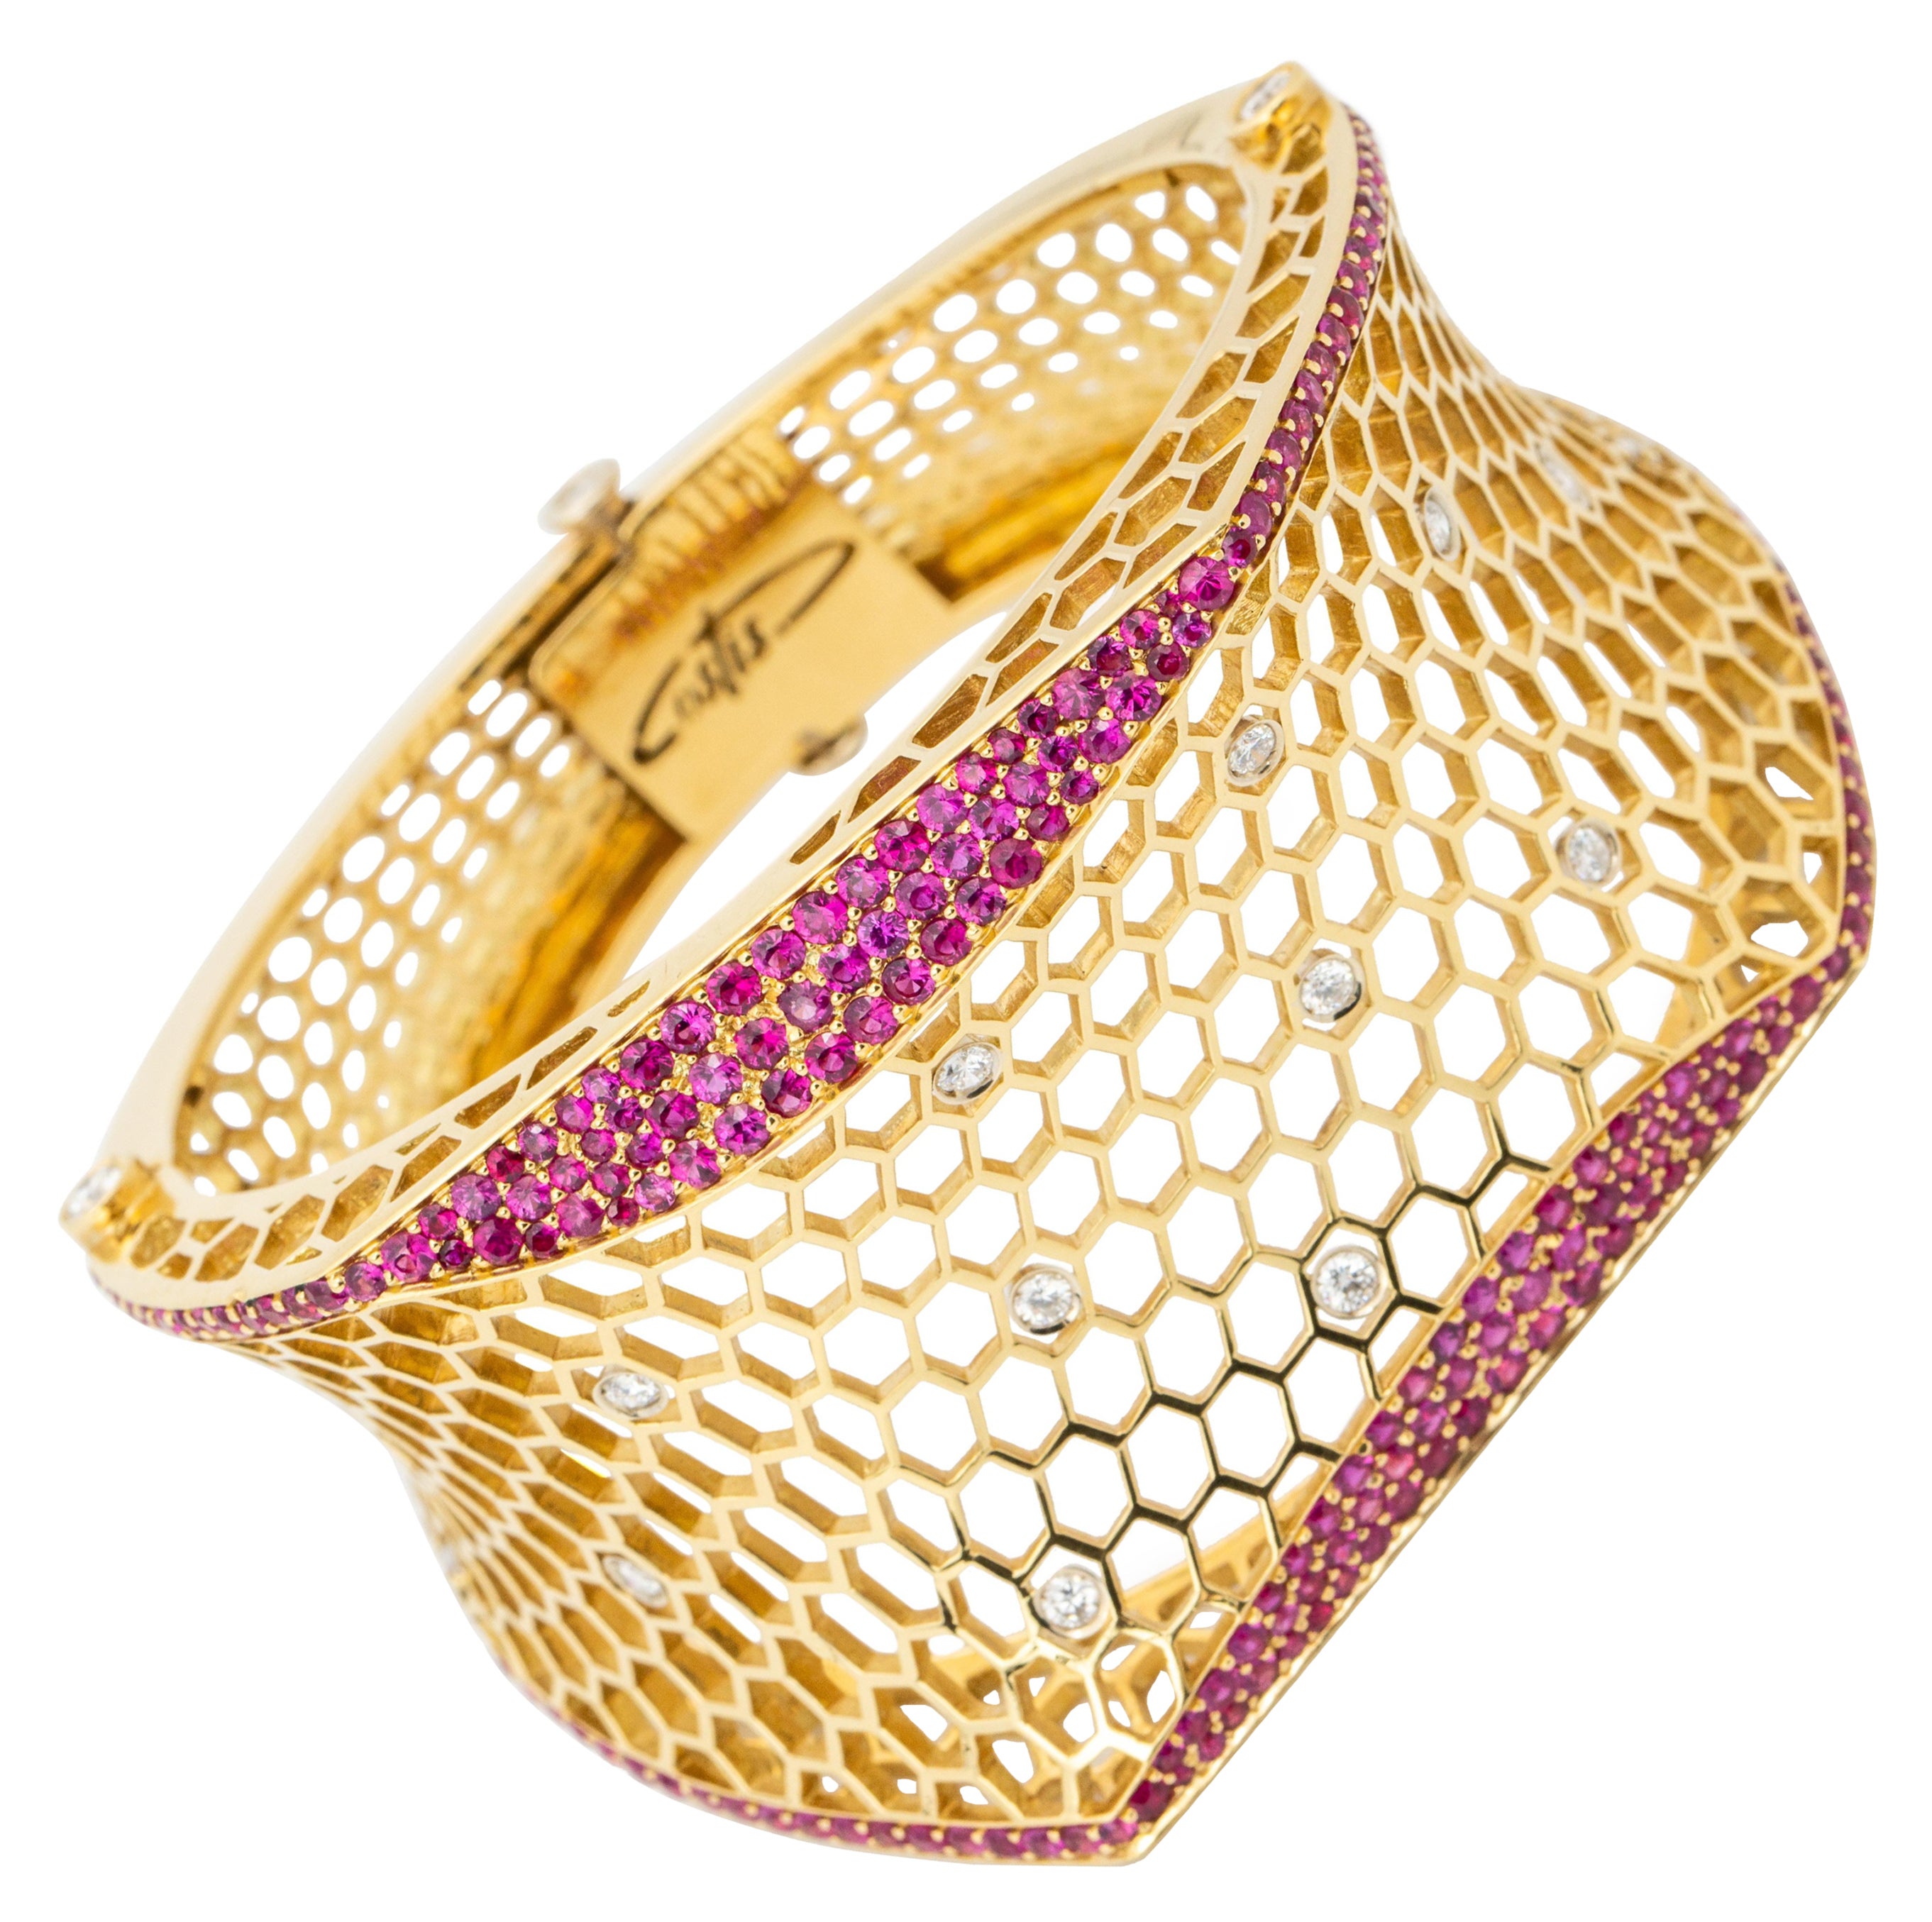 "Costis" Precious Beehive Collection Uneven Bracelet - Diamonds and Burma Rubies For Sale